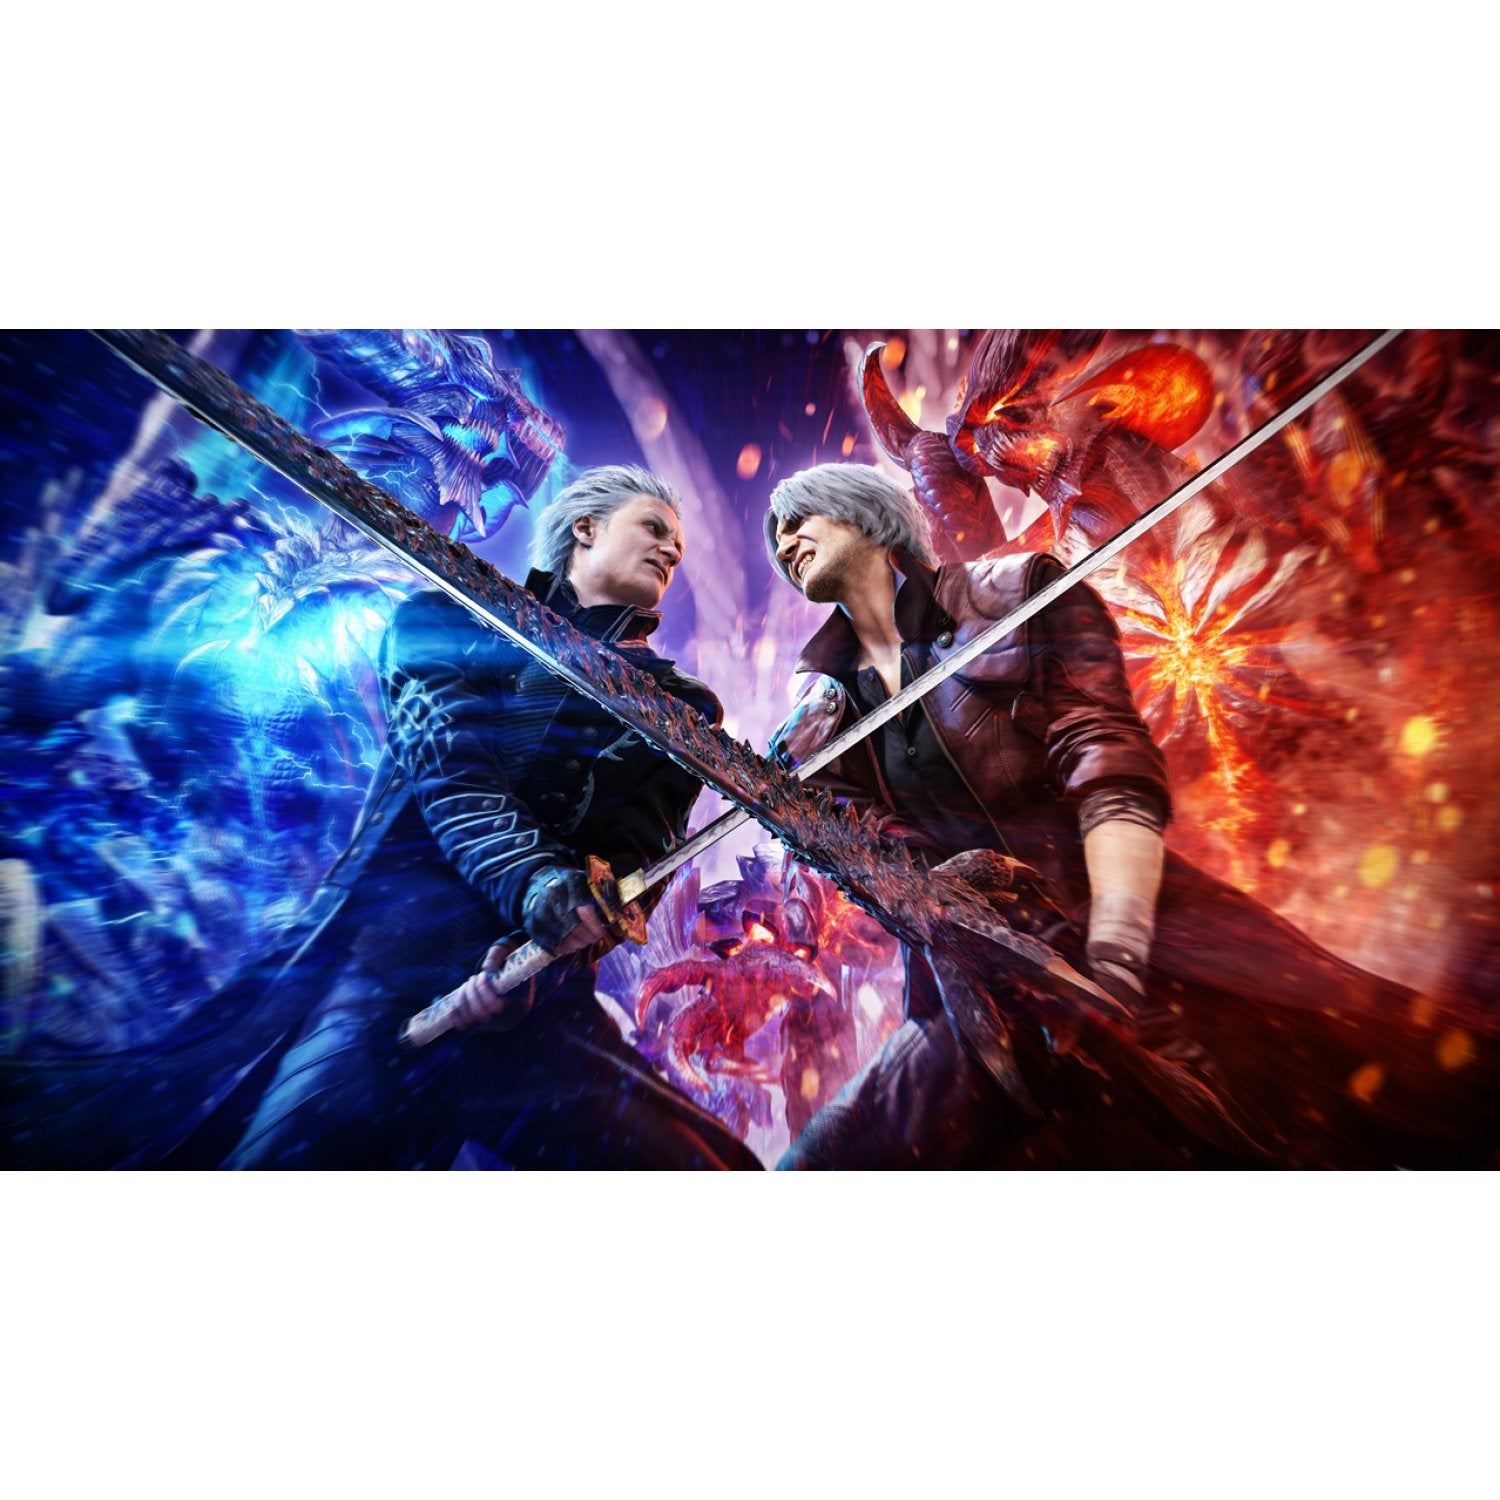 Devil May Cry 5: Special Edition PS5 And Xbox Series X Box Art